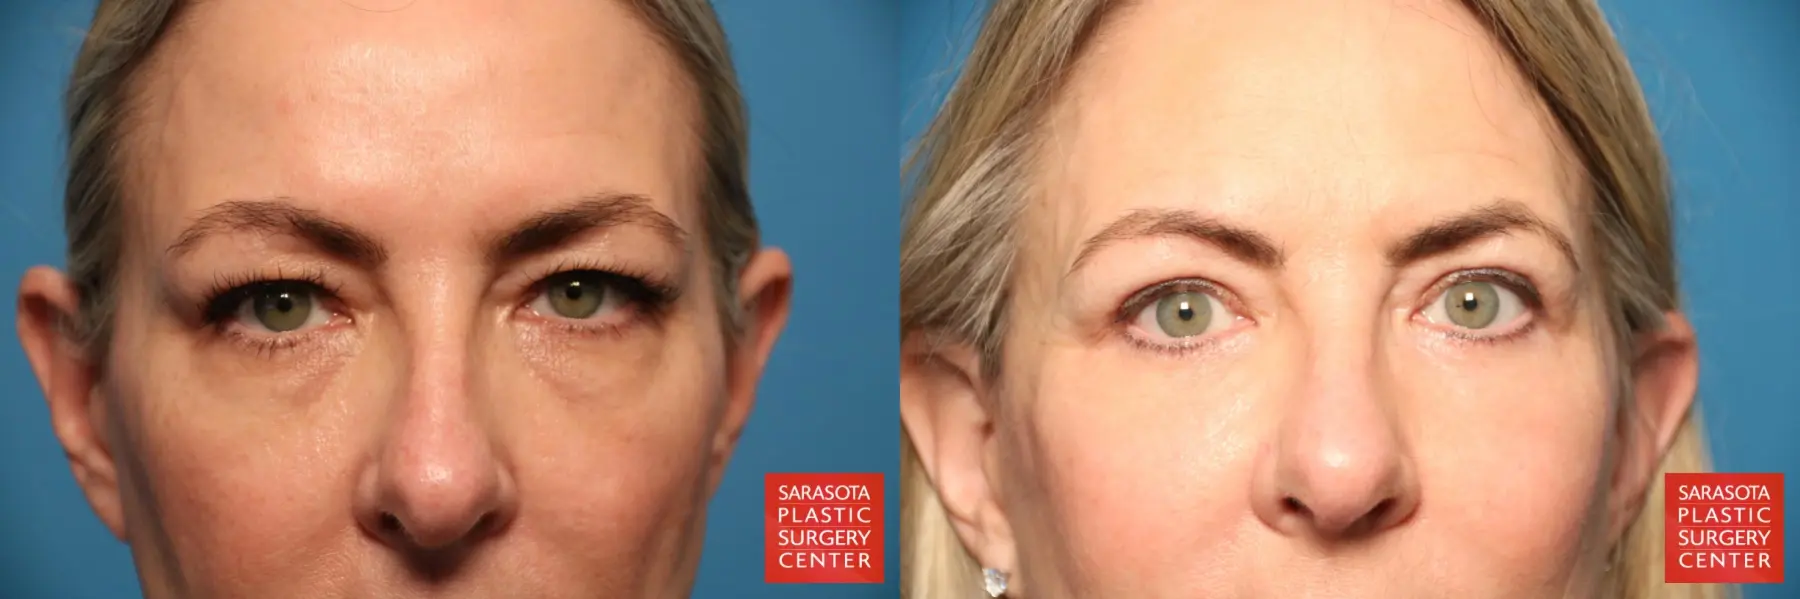 Eyelid Surgery: Patient 2 - Before and After  